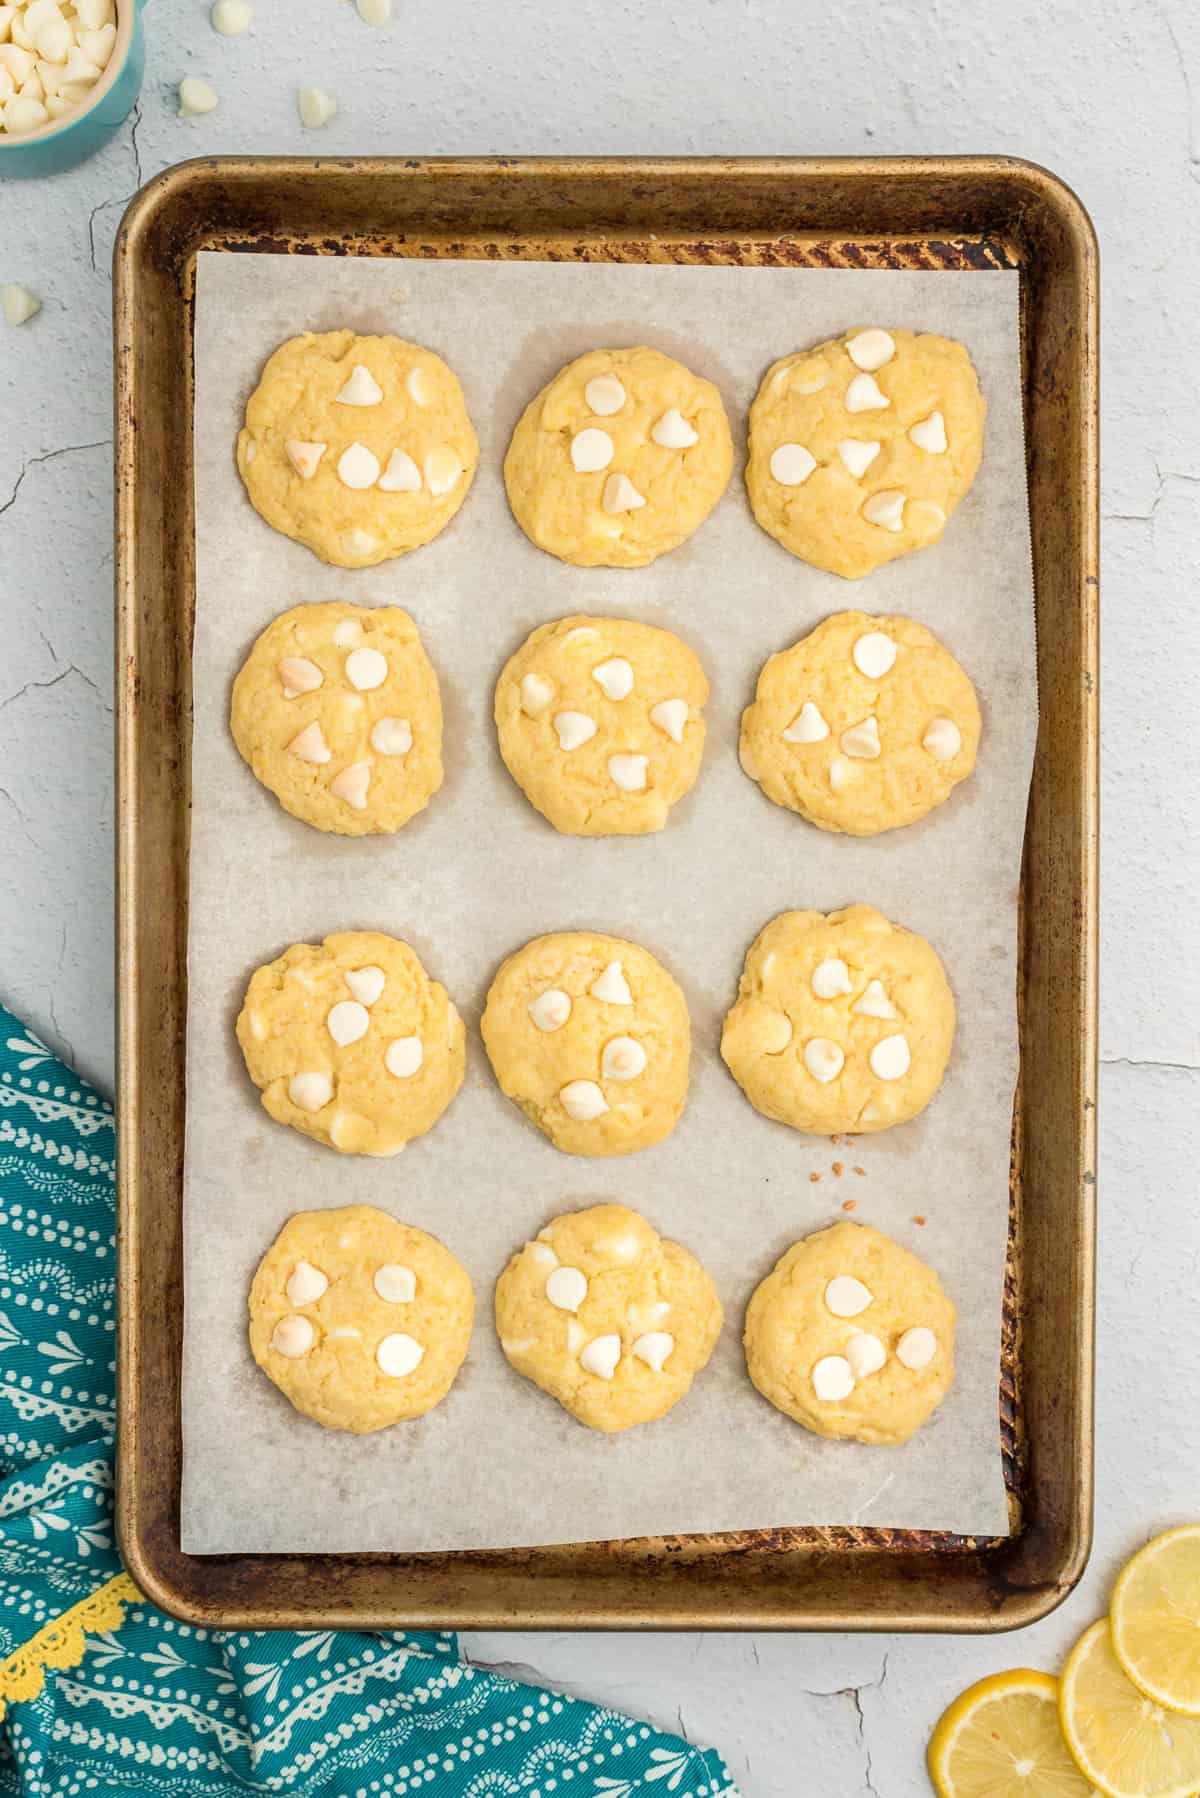 Baked lemon pudding cookies on cookie sheet.